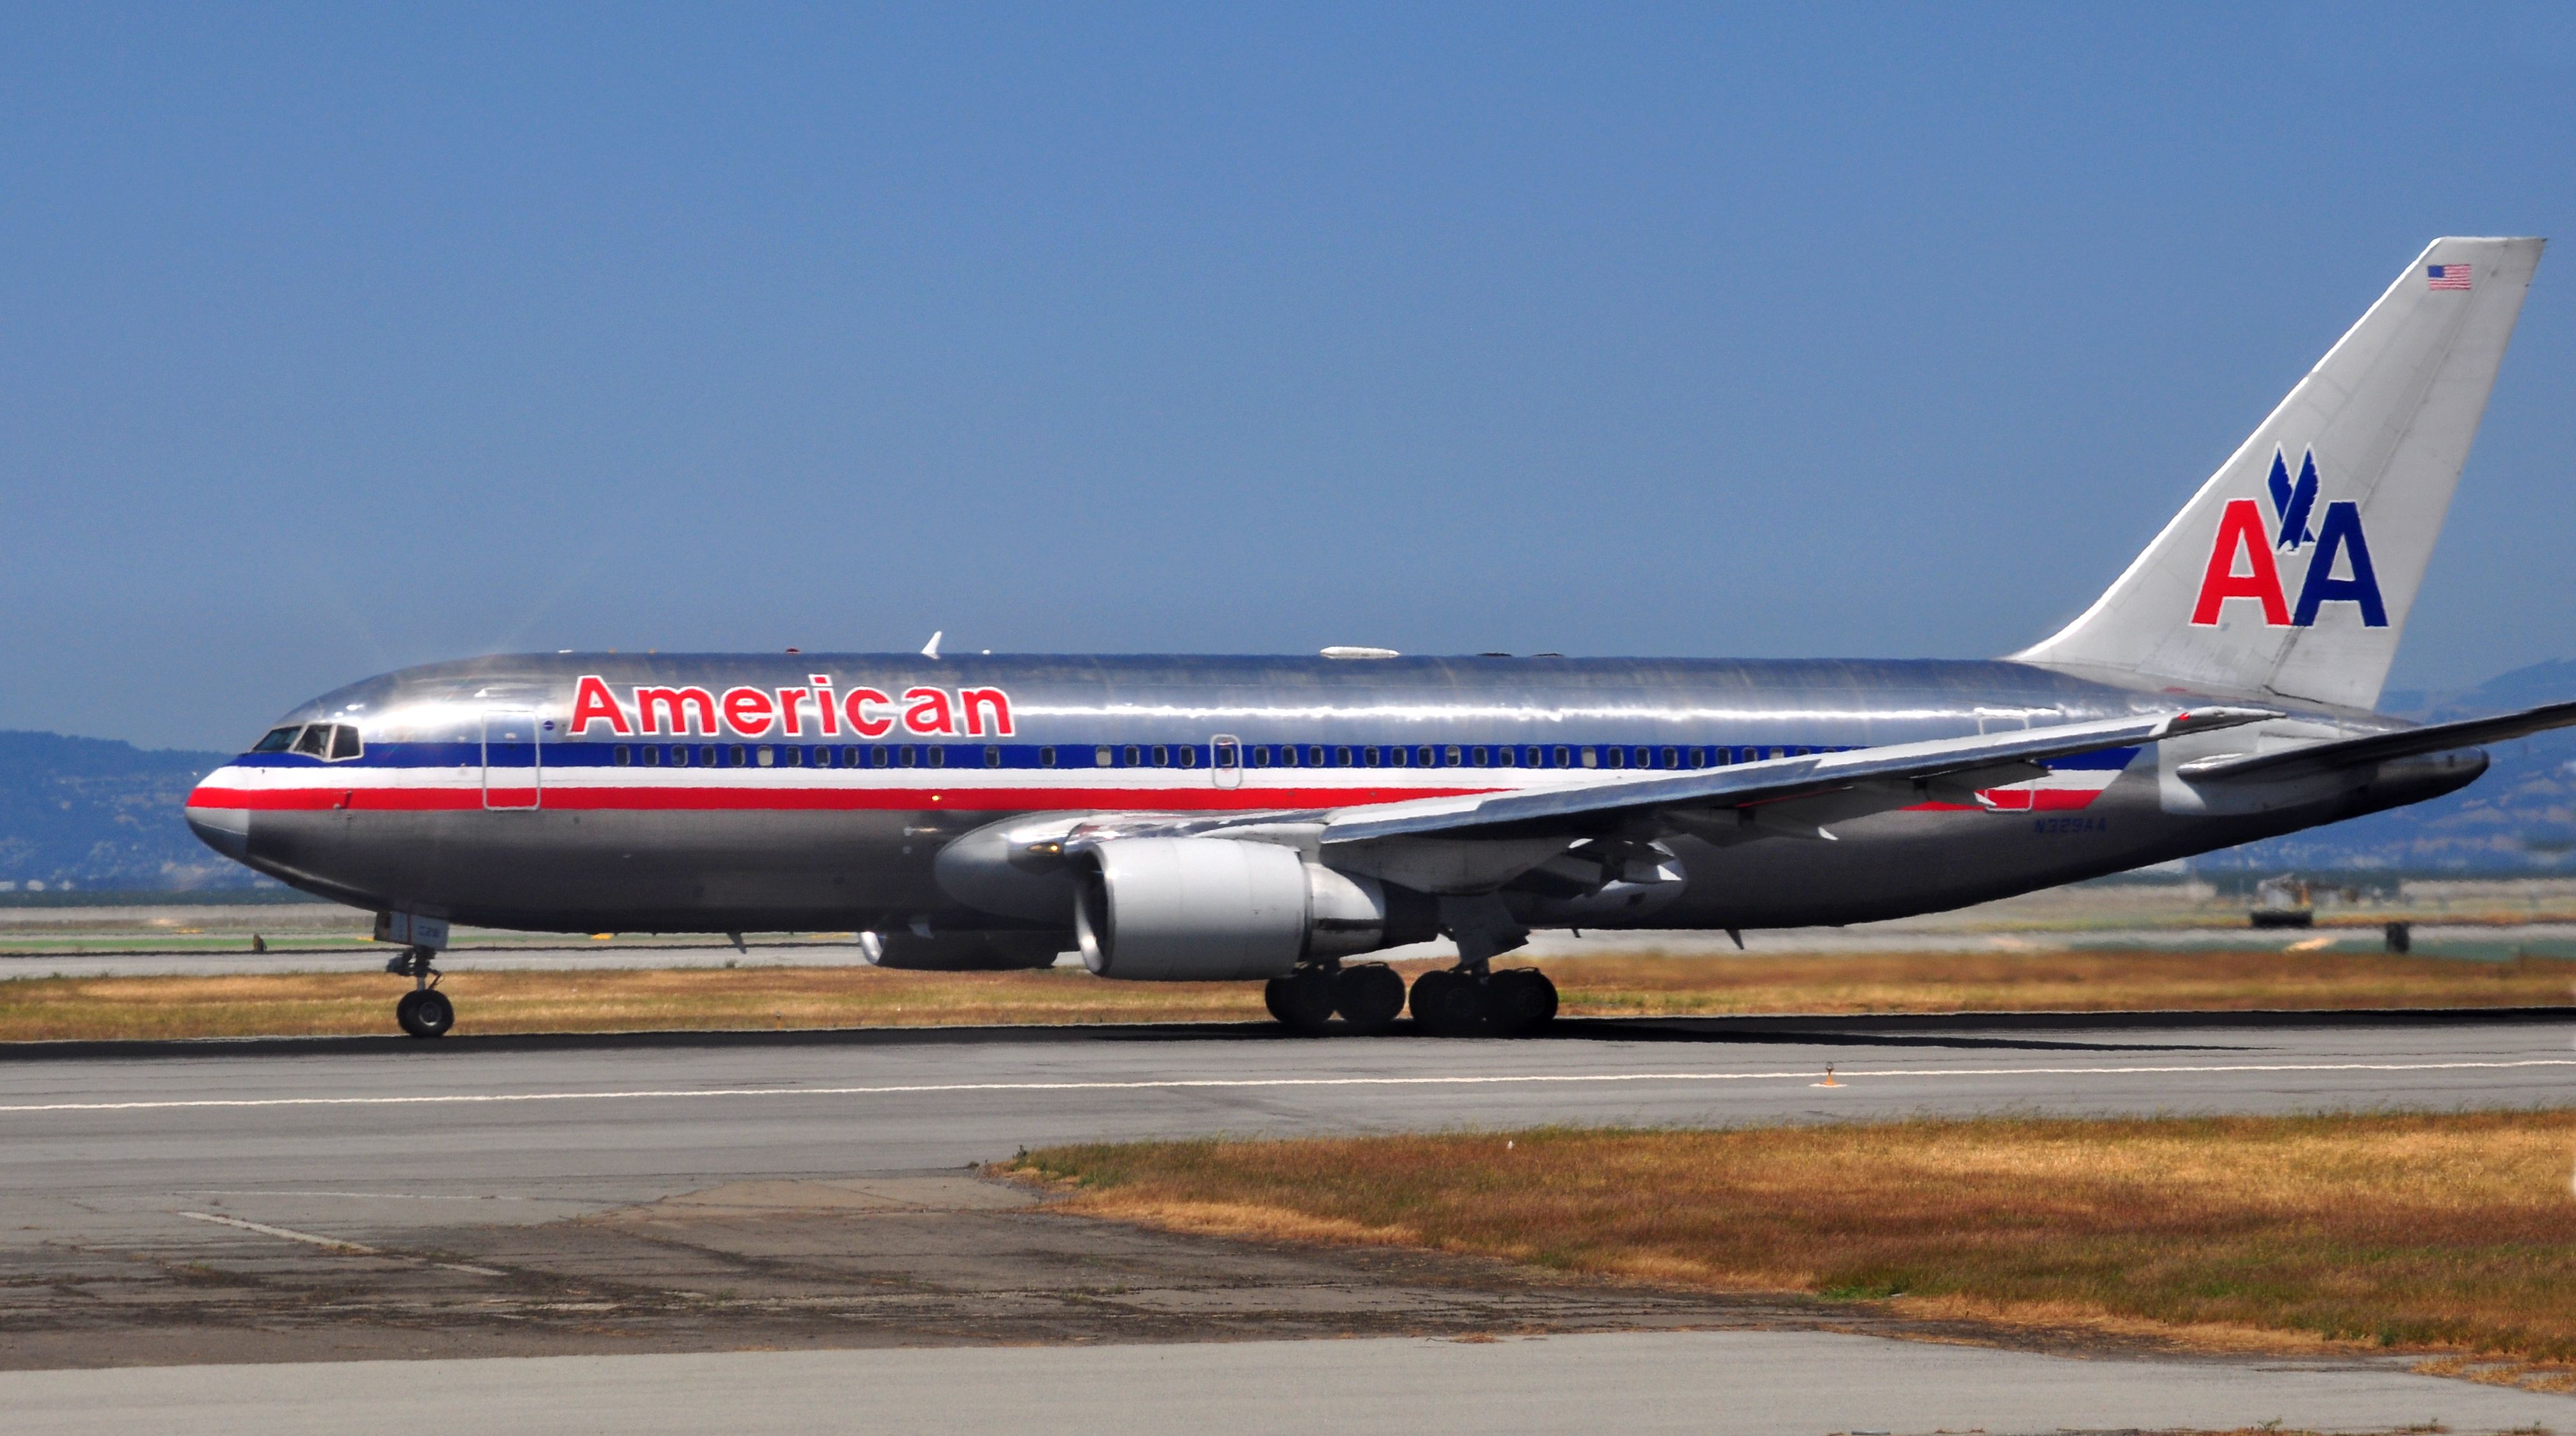 American Airlines Boeing 767 taxiing